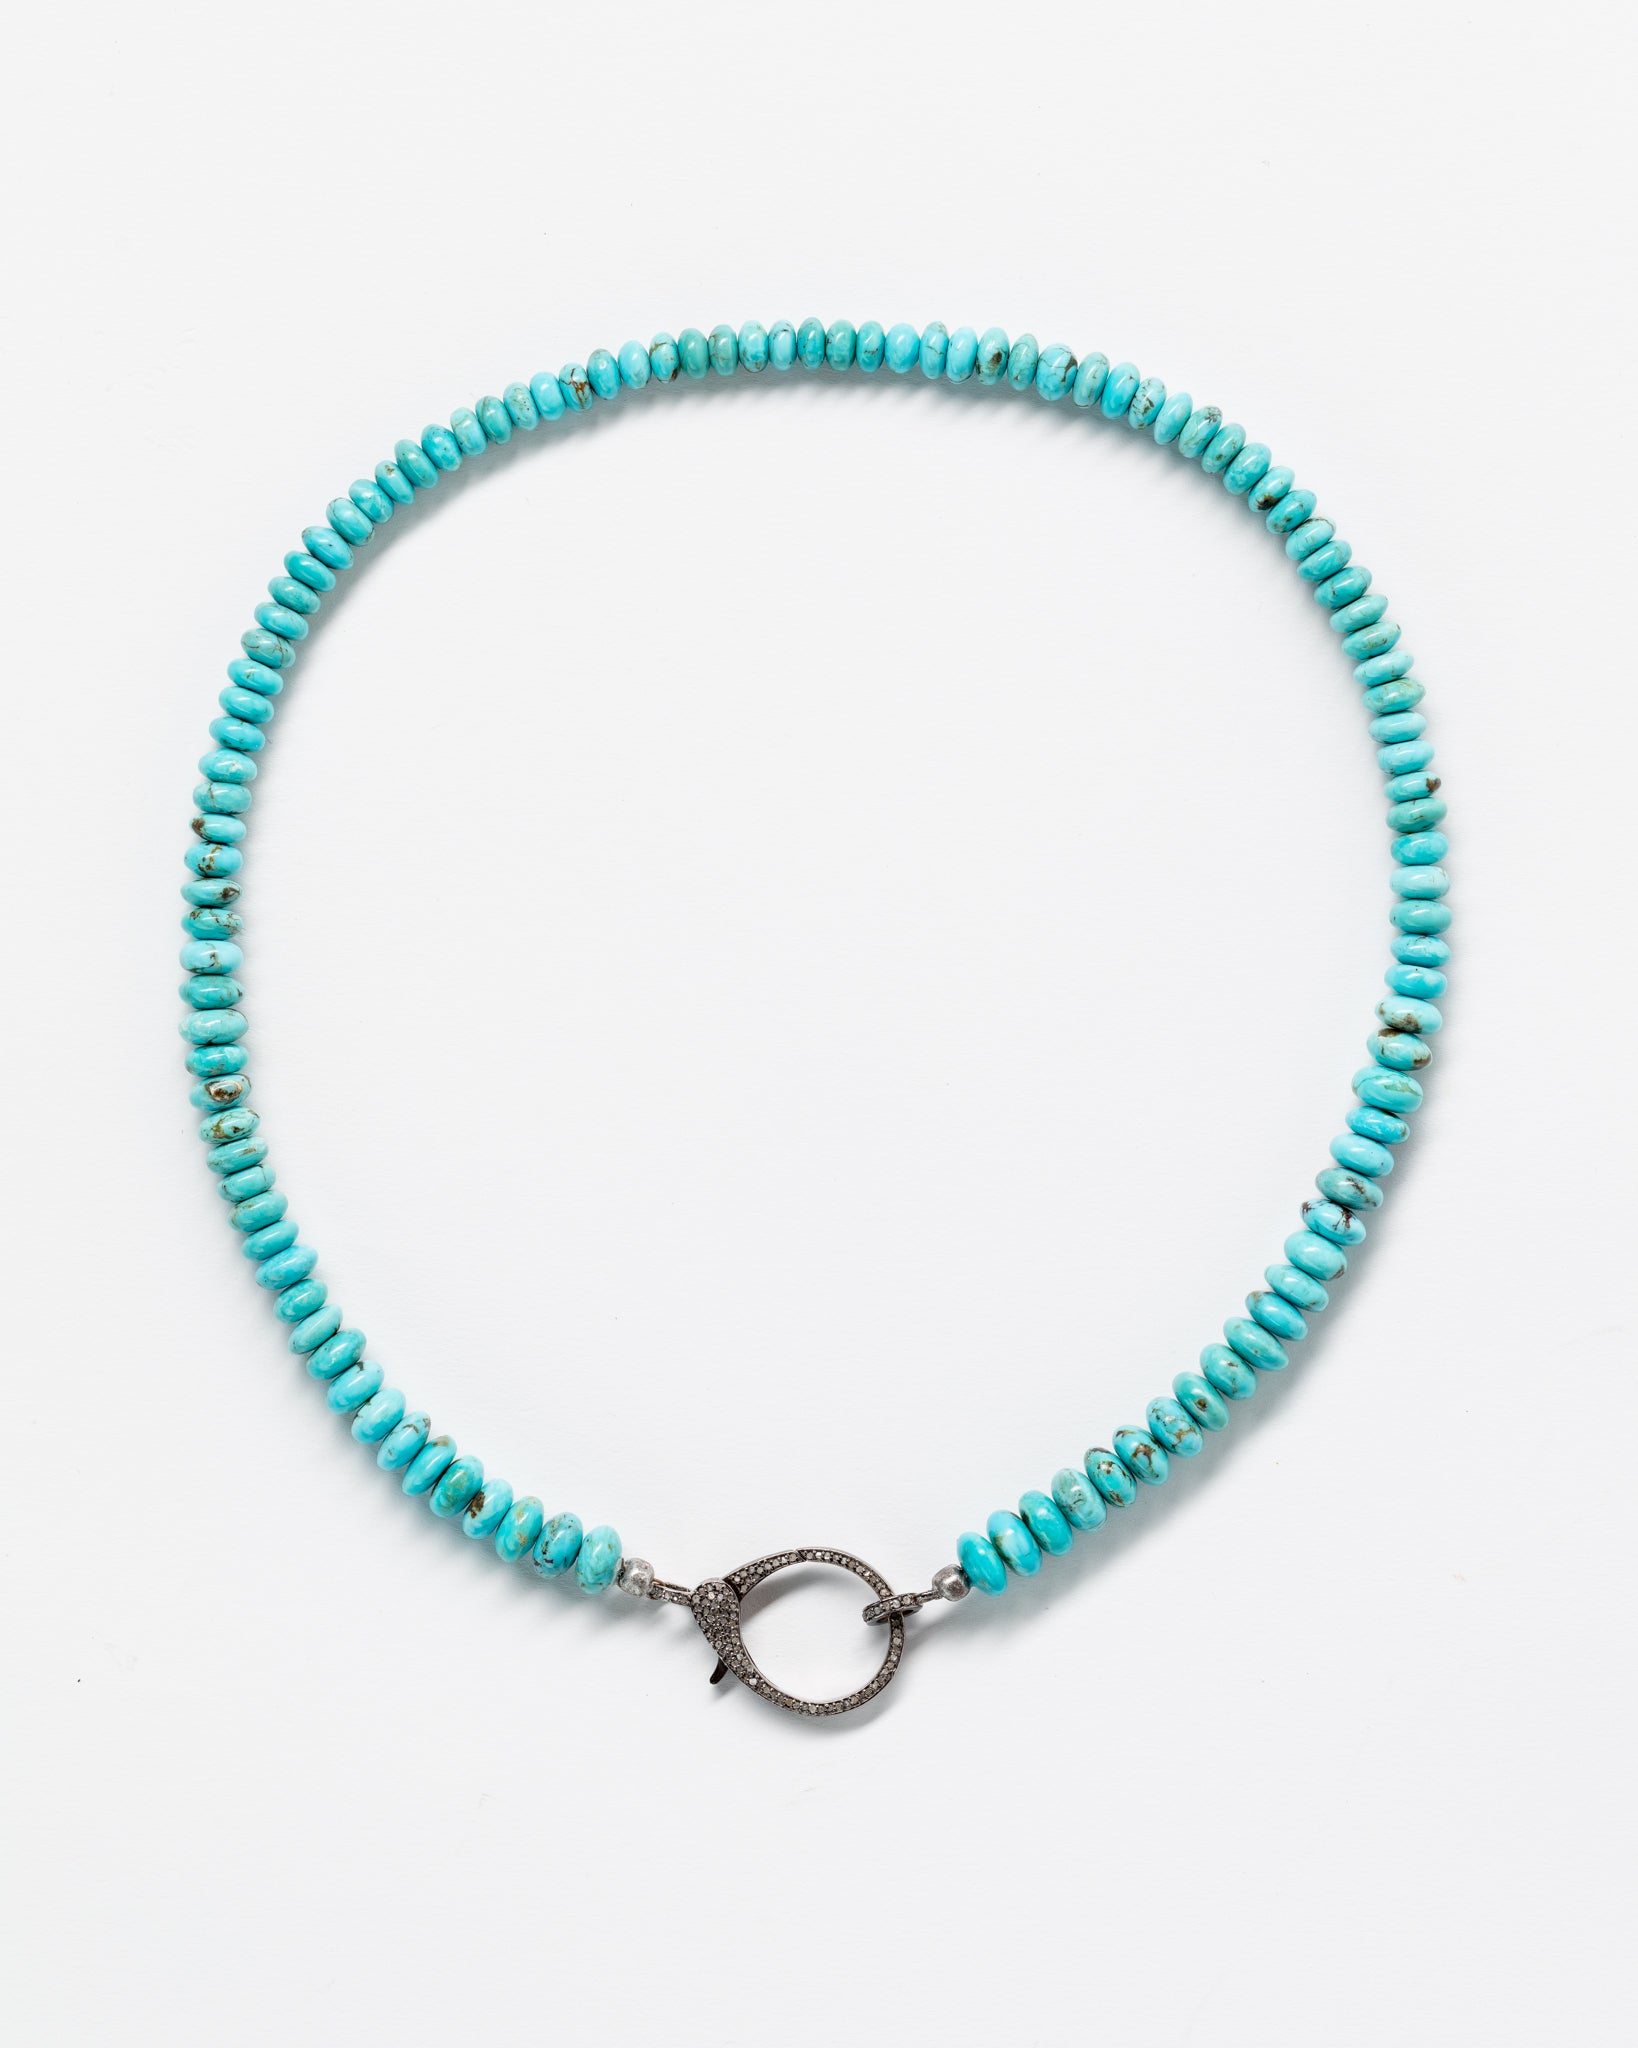 A beautiful Designs By Raya Arizona turquoise bead necklace displayed on a white background. The necklace features a circular silver clasp at its center.